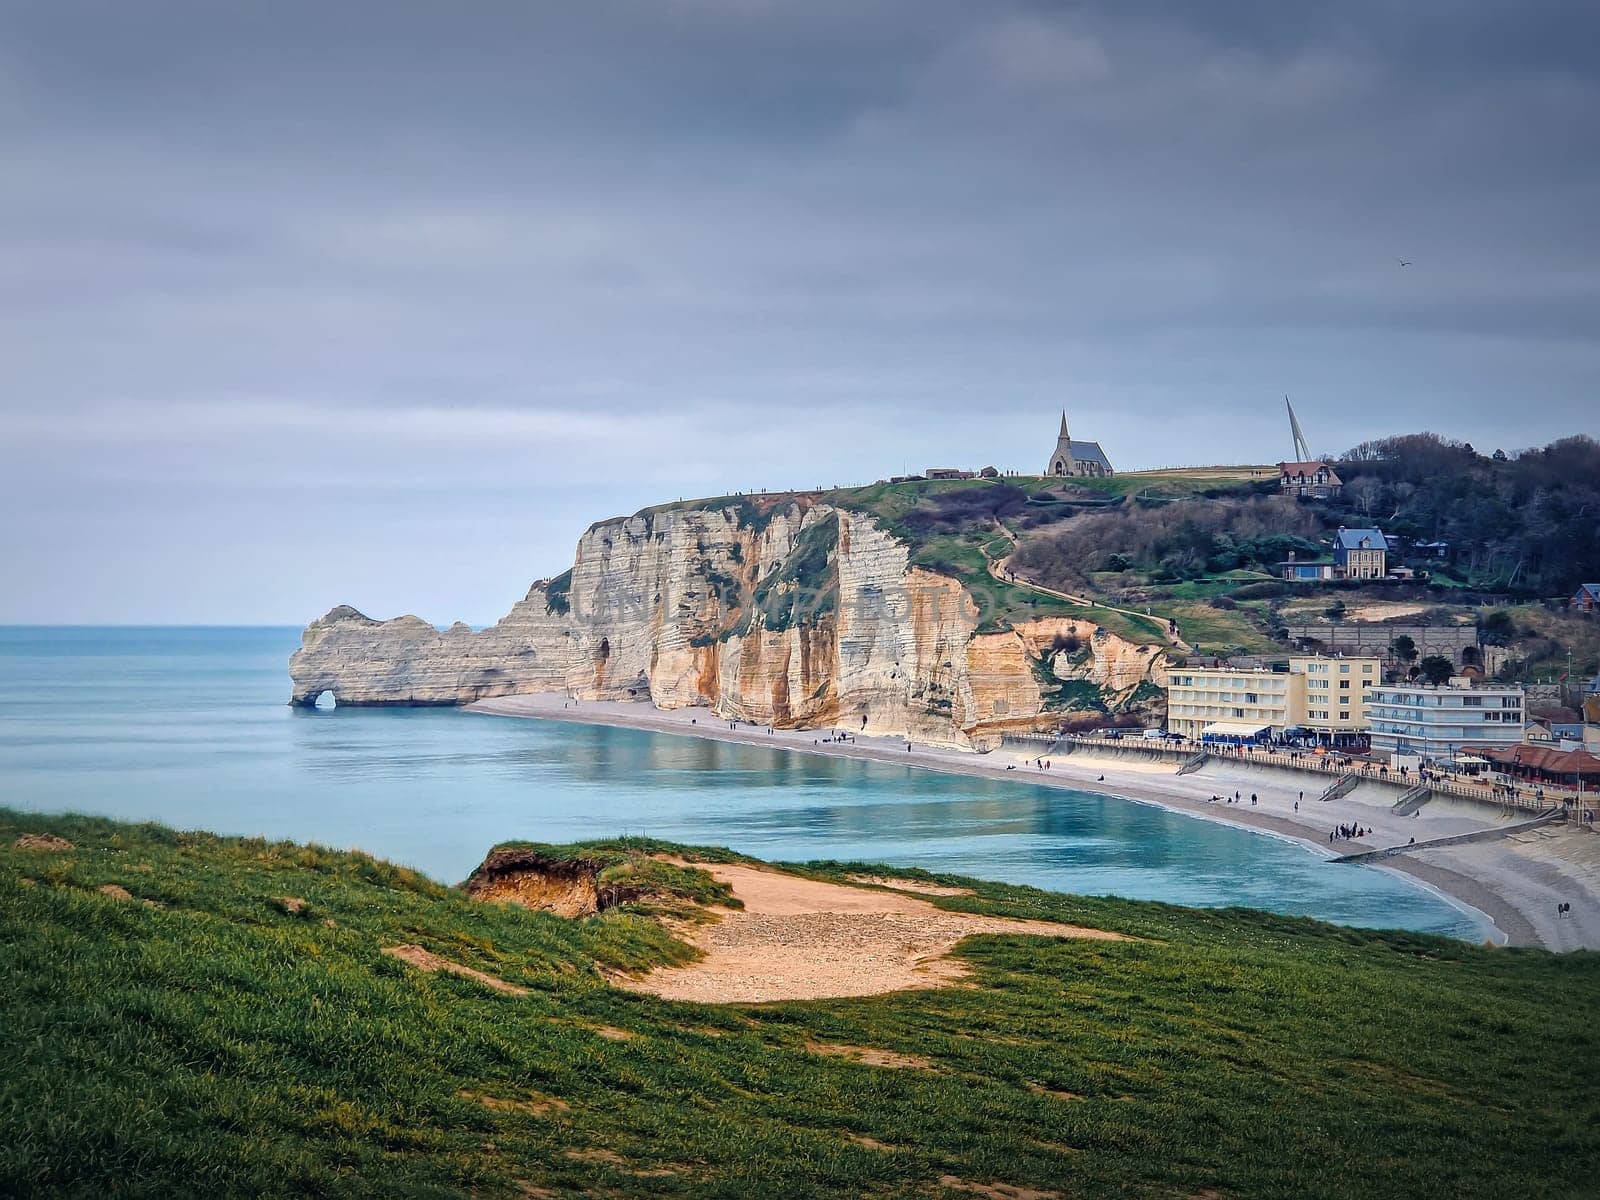 Sightseeing view to Etretat coastline with the famous Notre-Dame de la Garde chapel on the Amont cliff. Seashore washed by Atlantic ocean waters, Normandy, France by psychoshadow